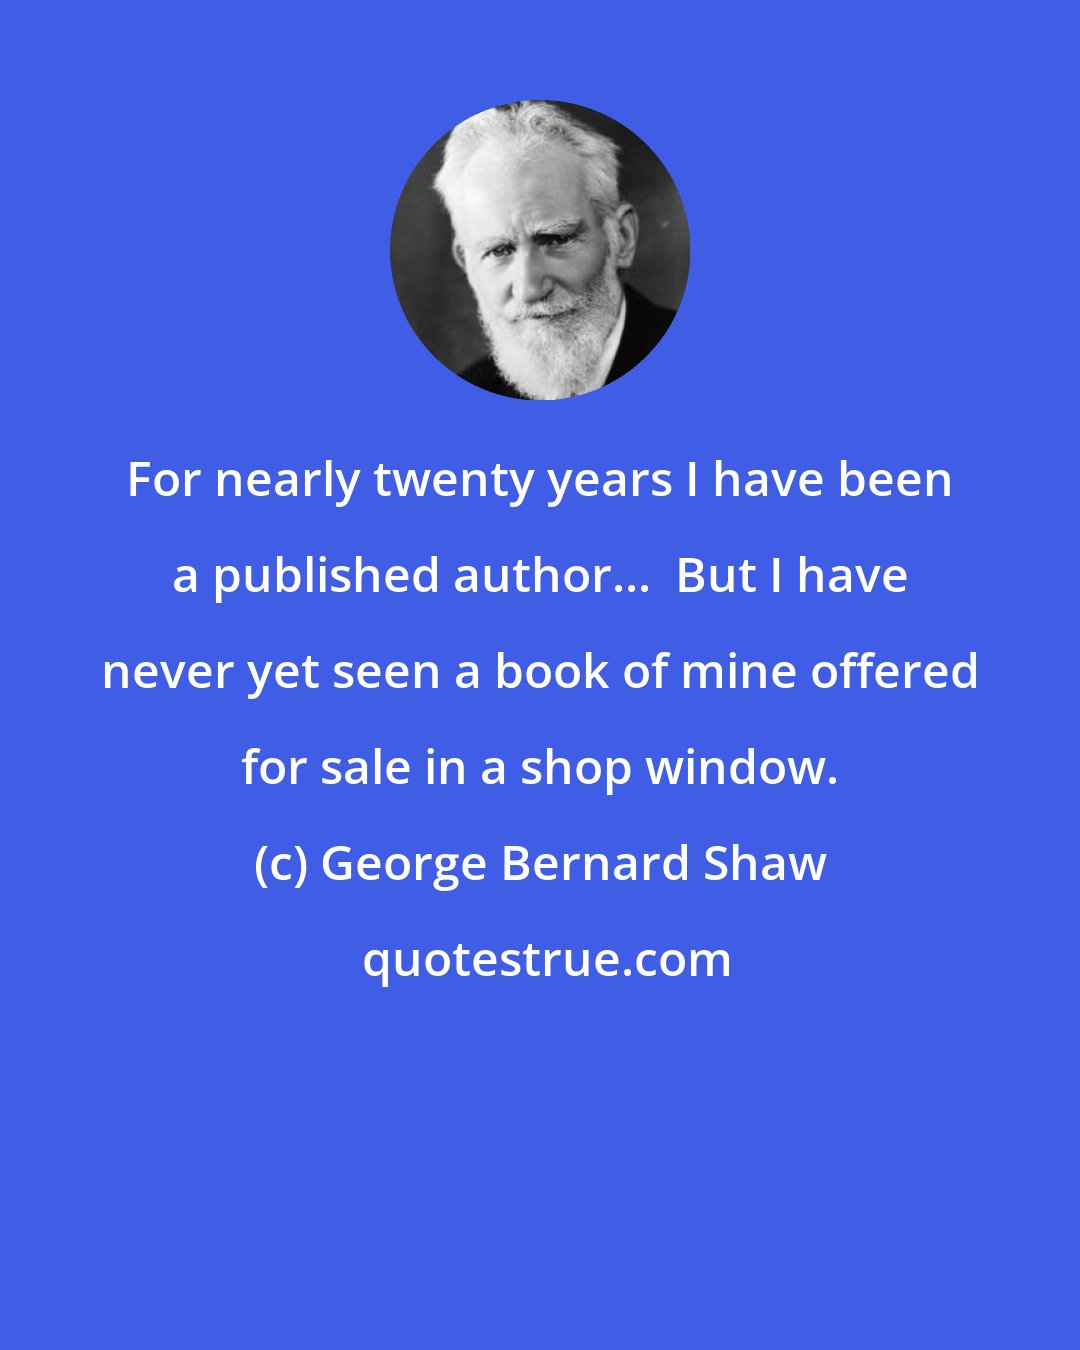 George Bernard Shaw: For nearly twenty years I have been a published author...  But I have never yet seen a book of mine offered for sale in a shop window.